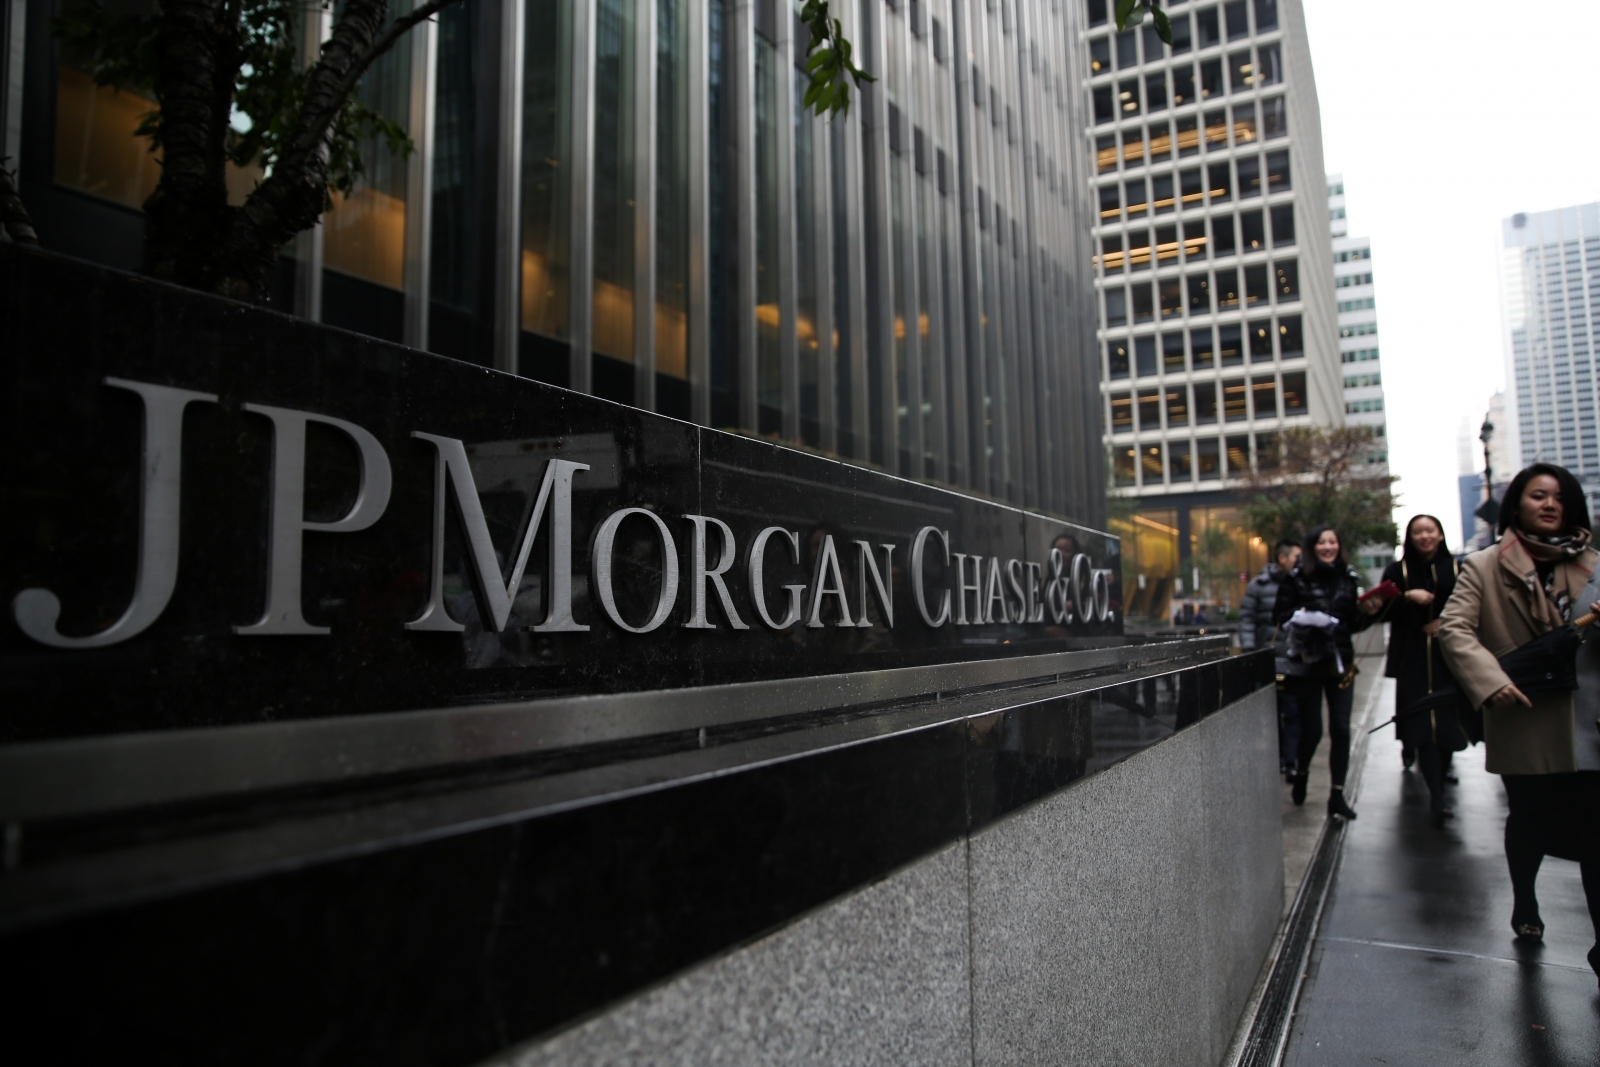 JPMorgan Chase 'glitch' gave some customers access to others' bank